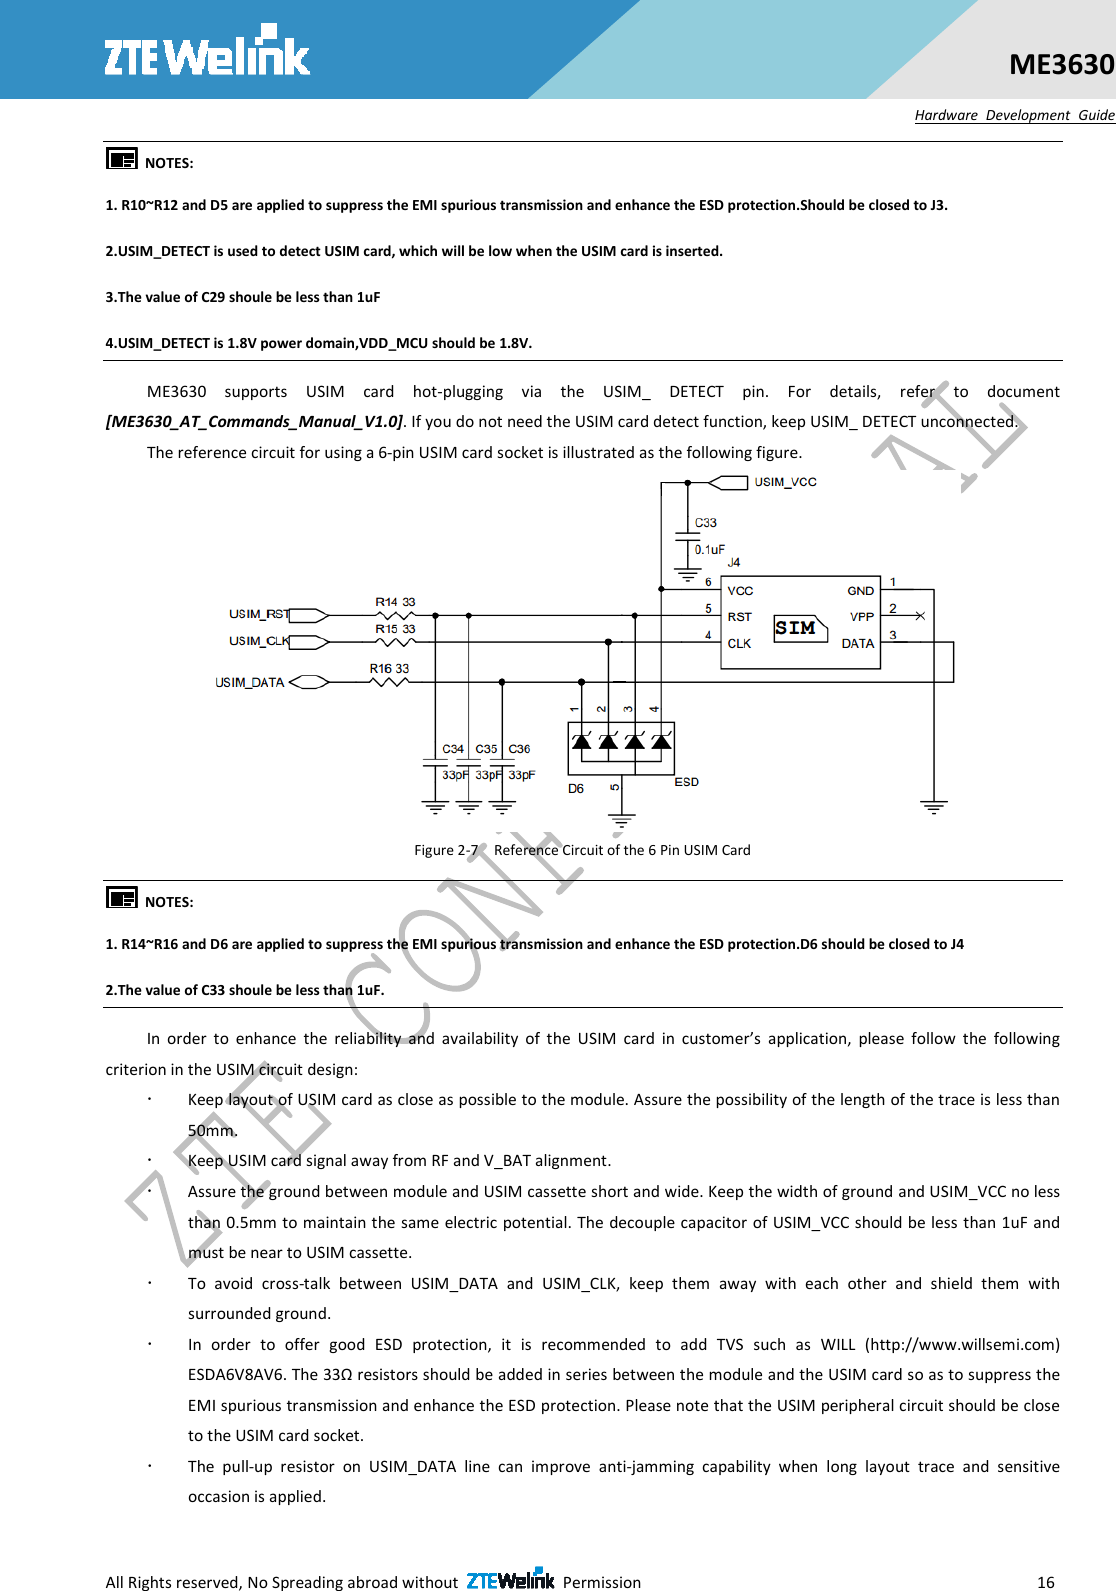  All Rights reserved, No Spreading abroad without    Permission                        16 ME3630 Hardware  Development  Guide   NOTES:   1. R10~R12 and D5 are applied to suppress the EMI spurious transmission and enhance the ESD protection.Should be closed to J3.   2.USIM_DETECT is used to detect USIM card, which will be low when the USIM card is inserted. 3.The value of C29 shoule be less than 1uF 4.USIM_DETECT is 1.8V power domain,VDD_MCU should be 1.8V. ME3630  supports  USIM  card  hot-plugging  via  the  USIM_  DETECT  pin.  For  details,  refer  to  document [ME3630_AT_Commands_Manual_V1.0]. If you do not need the USIM card detect function, keep USIM_ DETECT unconnected.   The reference circuit for using a 6-pin USIM card socket is illustrated as the following figure.  Figure 2-7    Reference Circuit of the 6 Pin USIM Card   NOTES:   1. R14~R16 and D6 are applied to suppress the EMI spurious transmission and enhance the ESD protection.D6 should be closed to J4 2.The value of C33 shoule be less than 1uF. In  order  to  enhance  the  reliability  and  availability  of  the  USIM  card  in  customer’s  application,  please  follow  the  following criterion in the USIM circuit design:  Keep layout of USIM card as close as possible to the module. Assure the possibility of the length of the trace is less than 50mm.    Keep USIM card signal away from RF and V_BAT alignment.  Assure the ground between module and USIM cassette short and wide. Keep the width of ground and USIM_VCC no less than 0.5mm to maintain the same electric potential. The decouple capacitor of USIM_VCC should be less than 1uF and must be near to USIM cassette.  To  avoid  cross-talk  between  USIM_DATA  and  USIM_CLK,  keep  them  away  with  each  other  and  shield  them  with surrounded ground.    In  order  to  offer  good  ESD  protection,  it  is  recommended  to  add  TVS  such  as  WILL  (http://www.willsemi.com) ESDA6V8AV6. The 33Ω resistors should be added in series between the module and the USIM card so as to suppress the EMI spurious transmission and enhance the ESD protection. Please note that the USIM peripheral circuit should be close to the USIM card socket.  The  pull-up  resistor  on  USIM_DATA  line  can  improve  anti-jamming  capability  when  long  layout  trace  and  sensitive occasion is applied. 